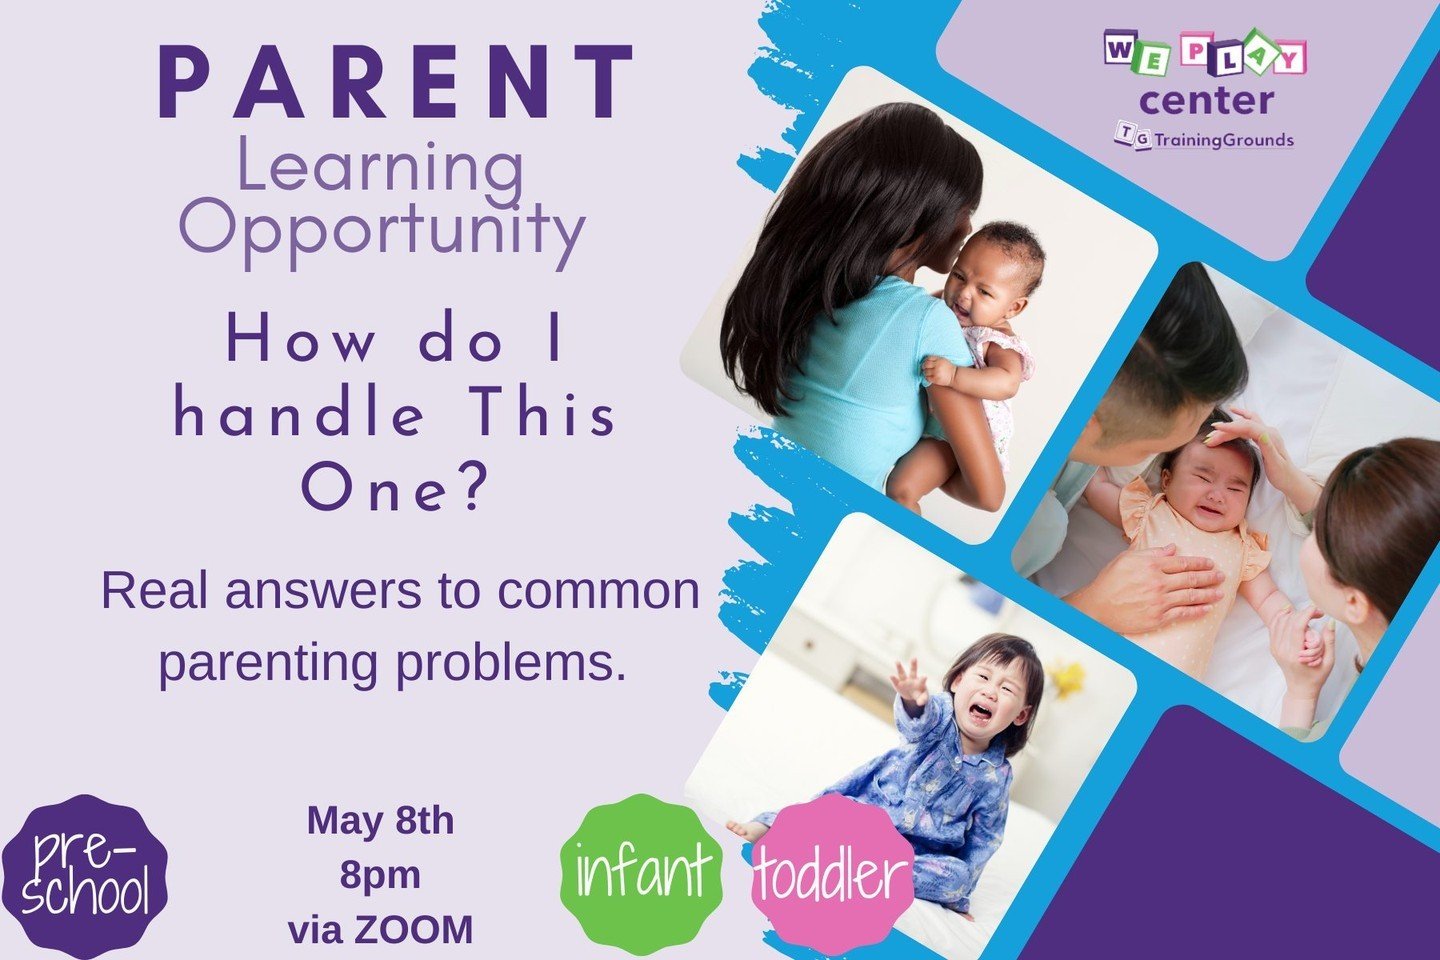 Join us Tomorrow for a fantastic Parent Learning Opportunity!

Empowering Parents with Real Solutions for Everyday Parenting Challenges 

Register now by clicking the link in the bio.

@homegrownhbcc @La_Believes @agendaforchildren